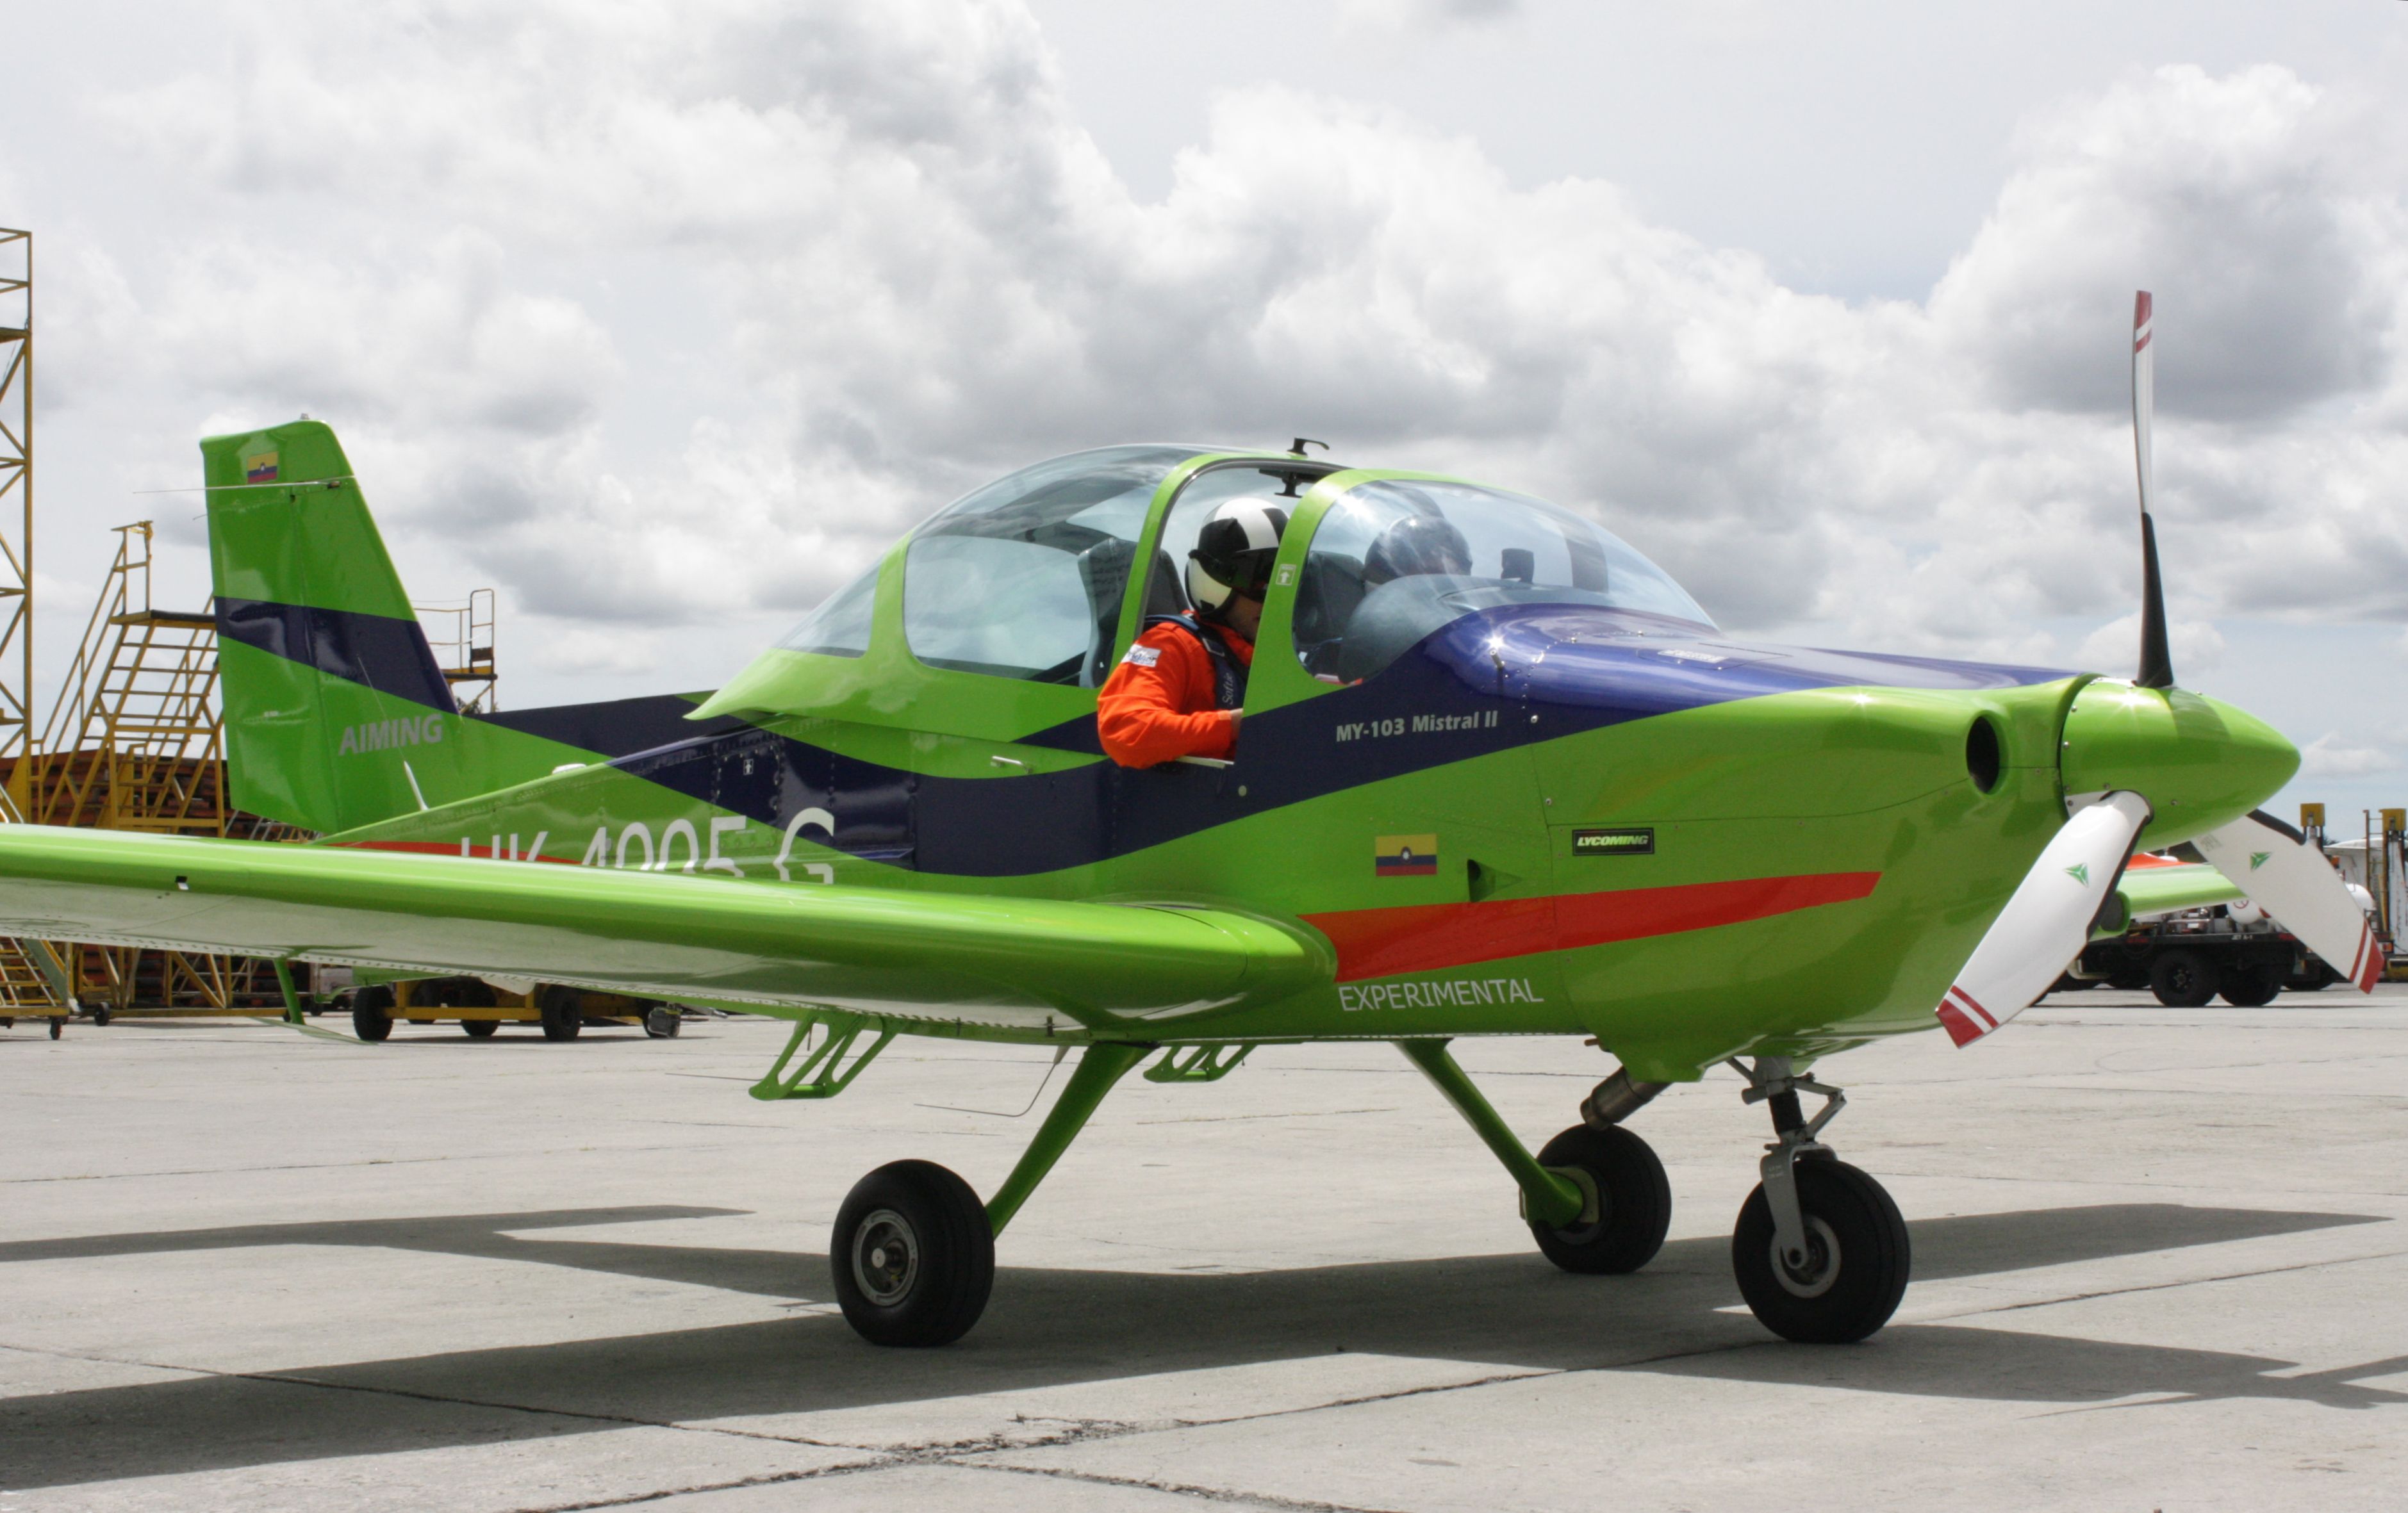 Mylius MY-103 Mistral II before its maiden flight at Rionegro airport in Colombia